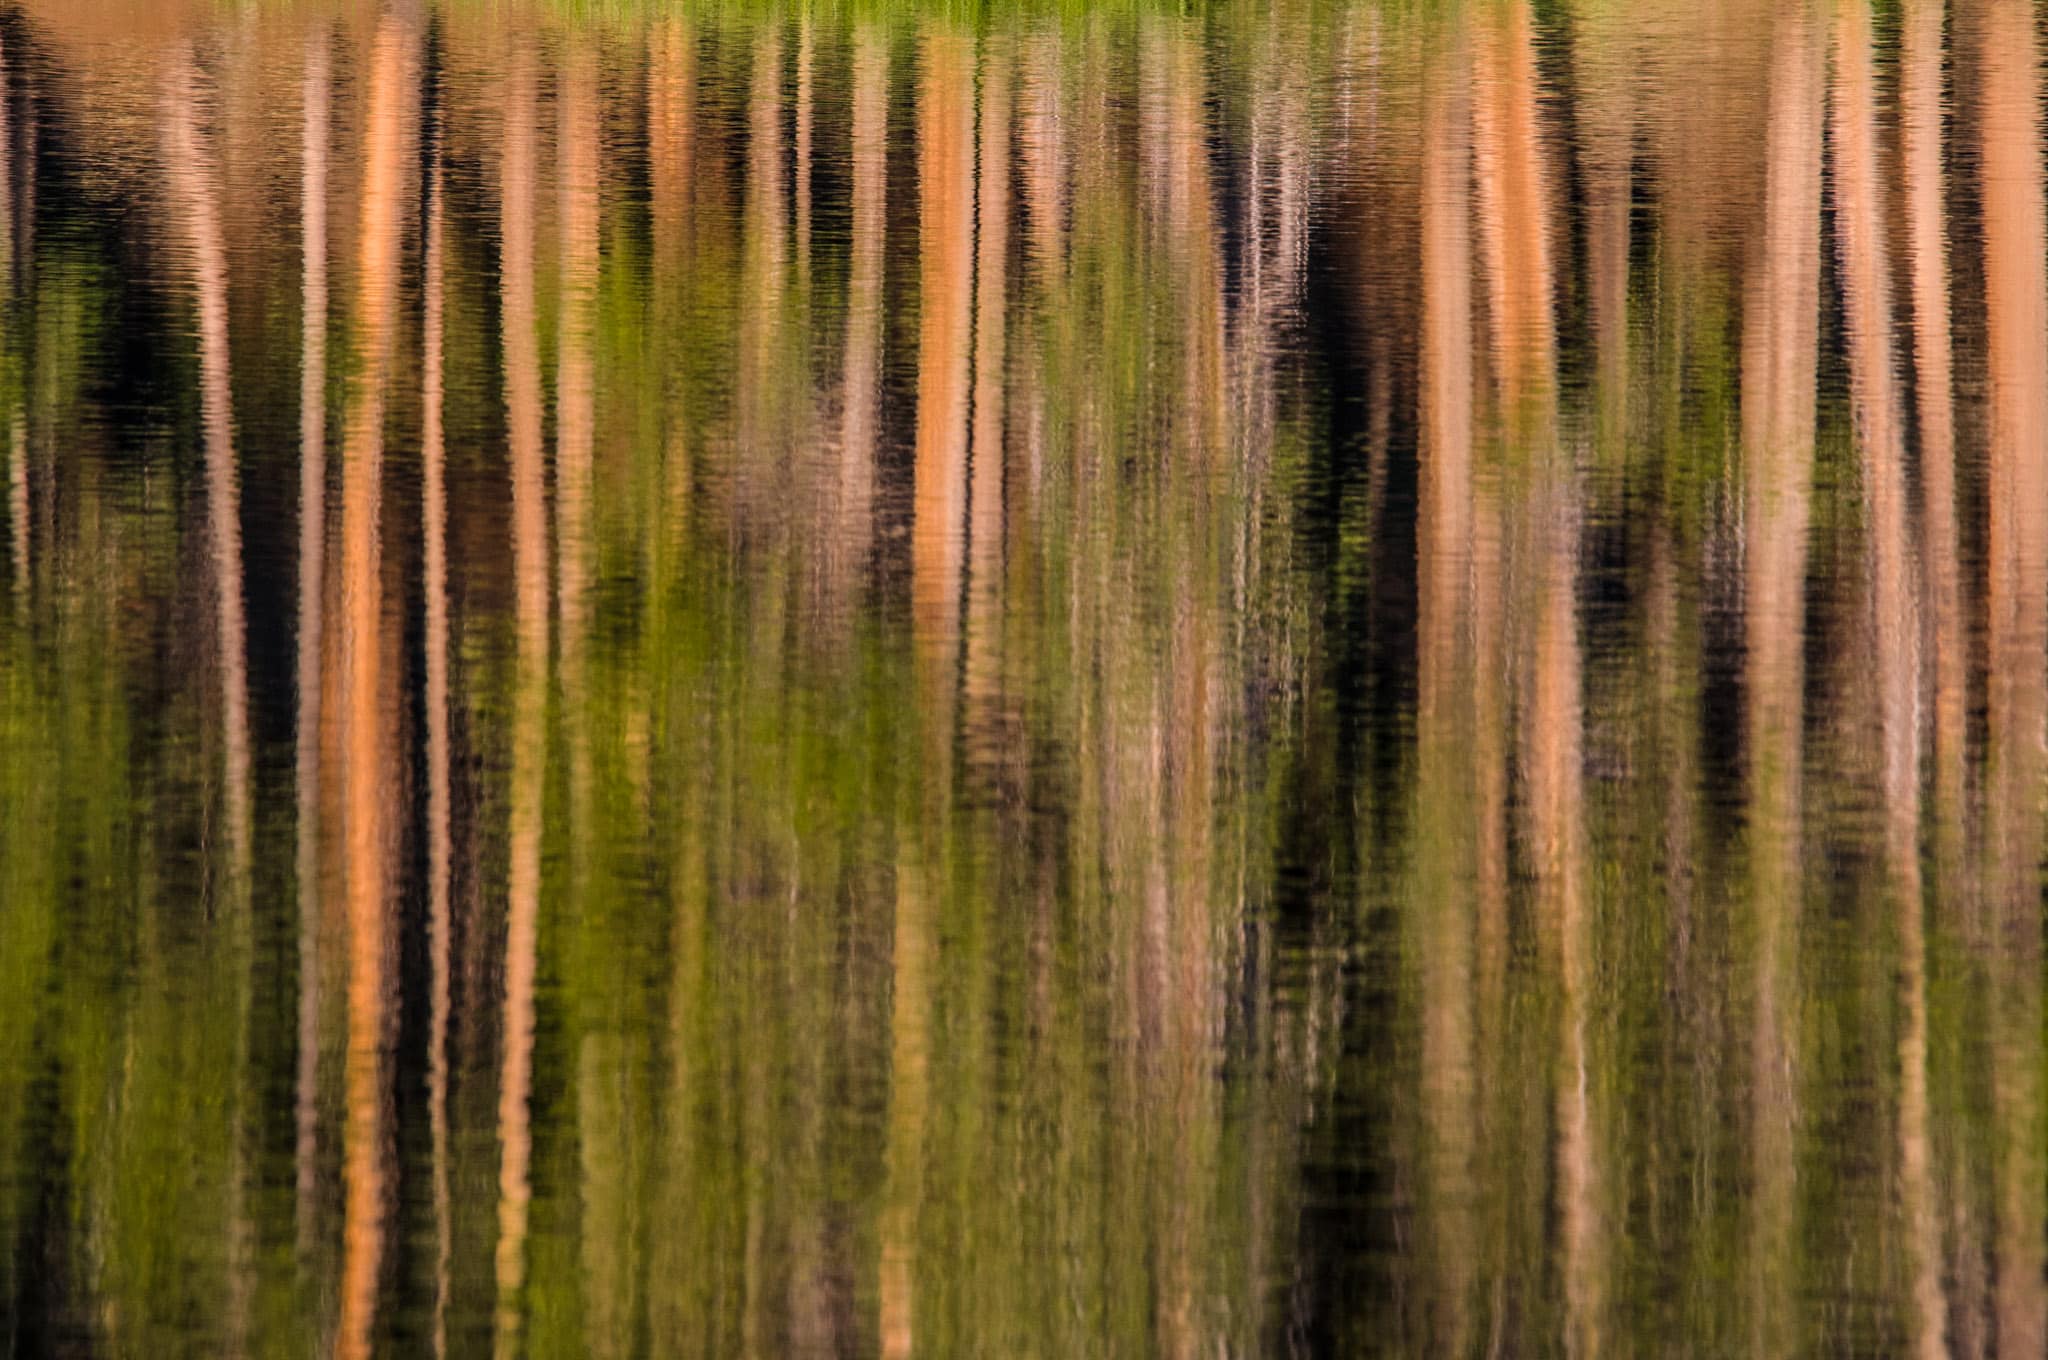 Tree trunks reflected in the ripples of Sprague Lake in Rocky Mountain Park.